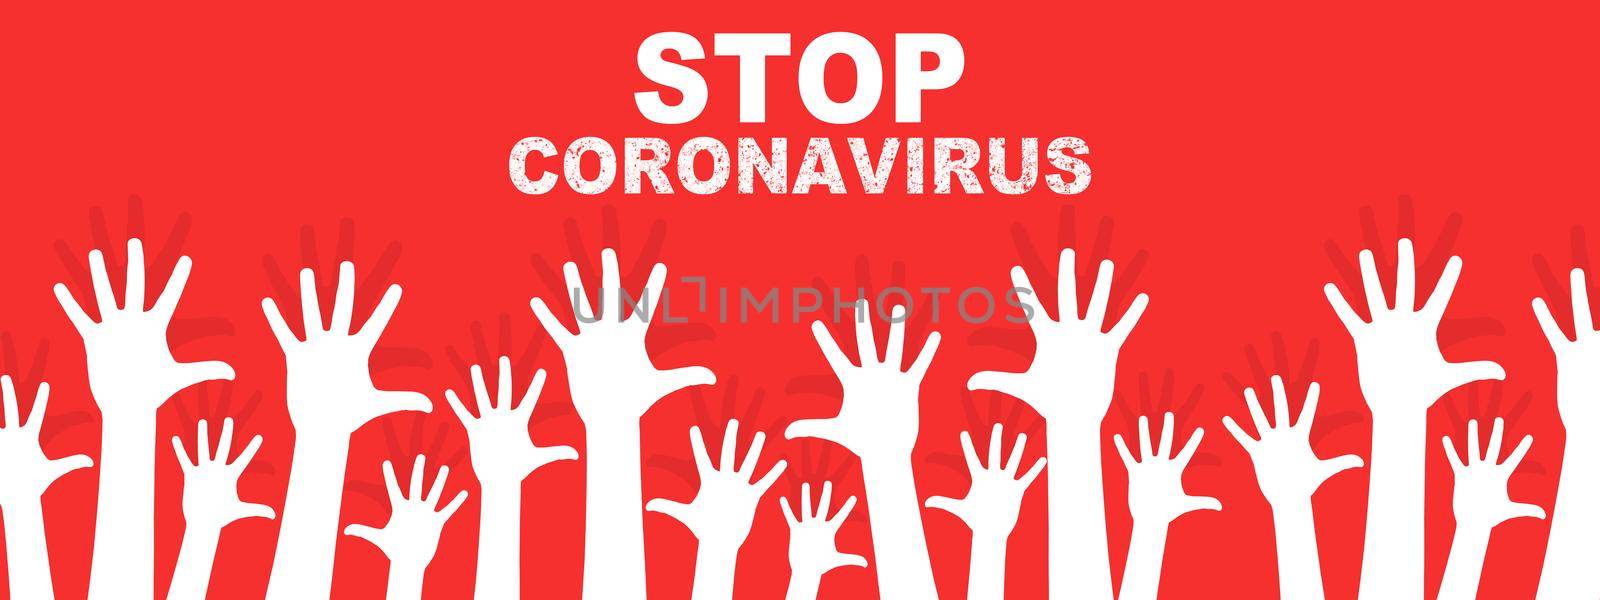 Coronavirus and virus prevention concept. Pandemic outbreak as respiratory syndrome with viral pneumonia symptom.